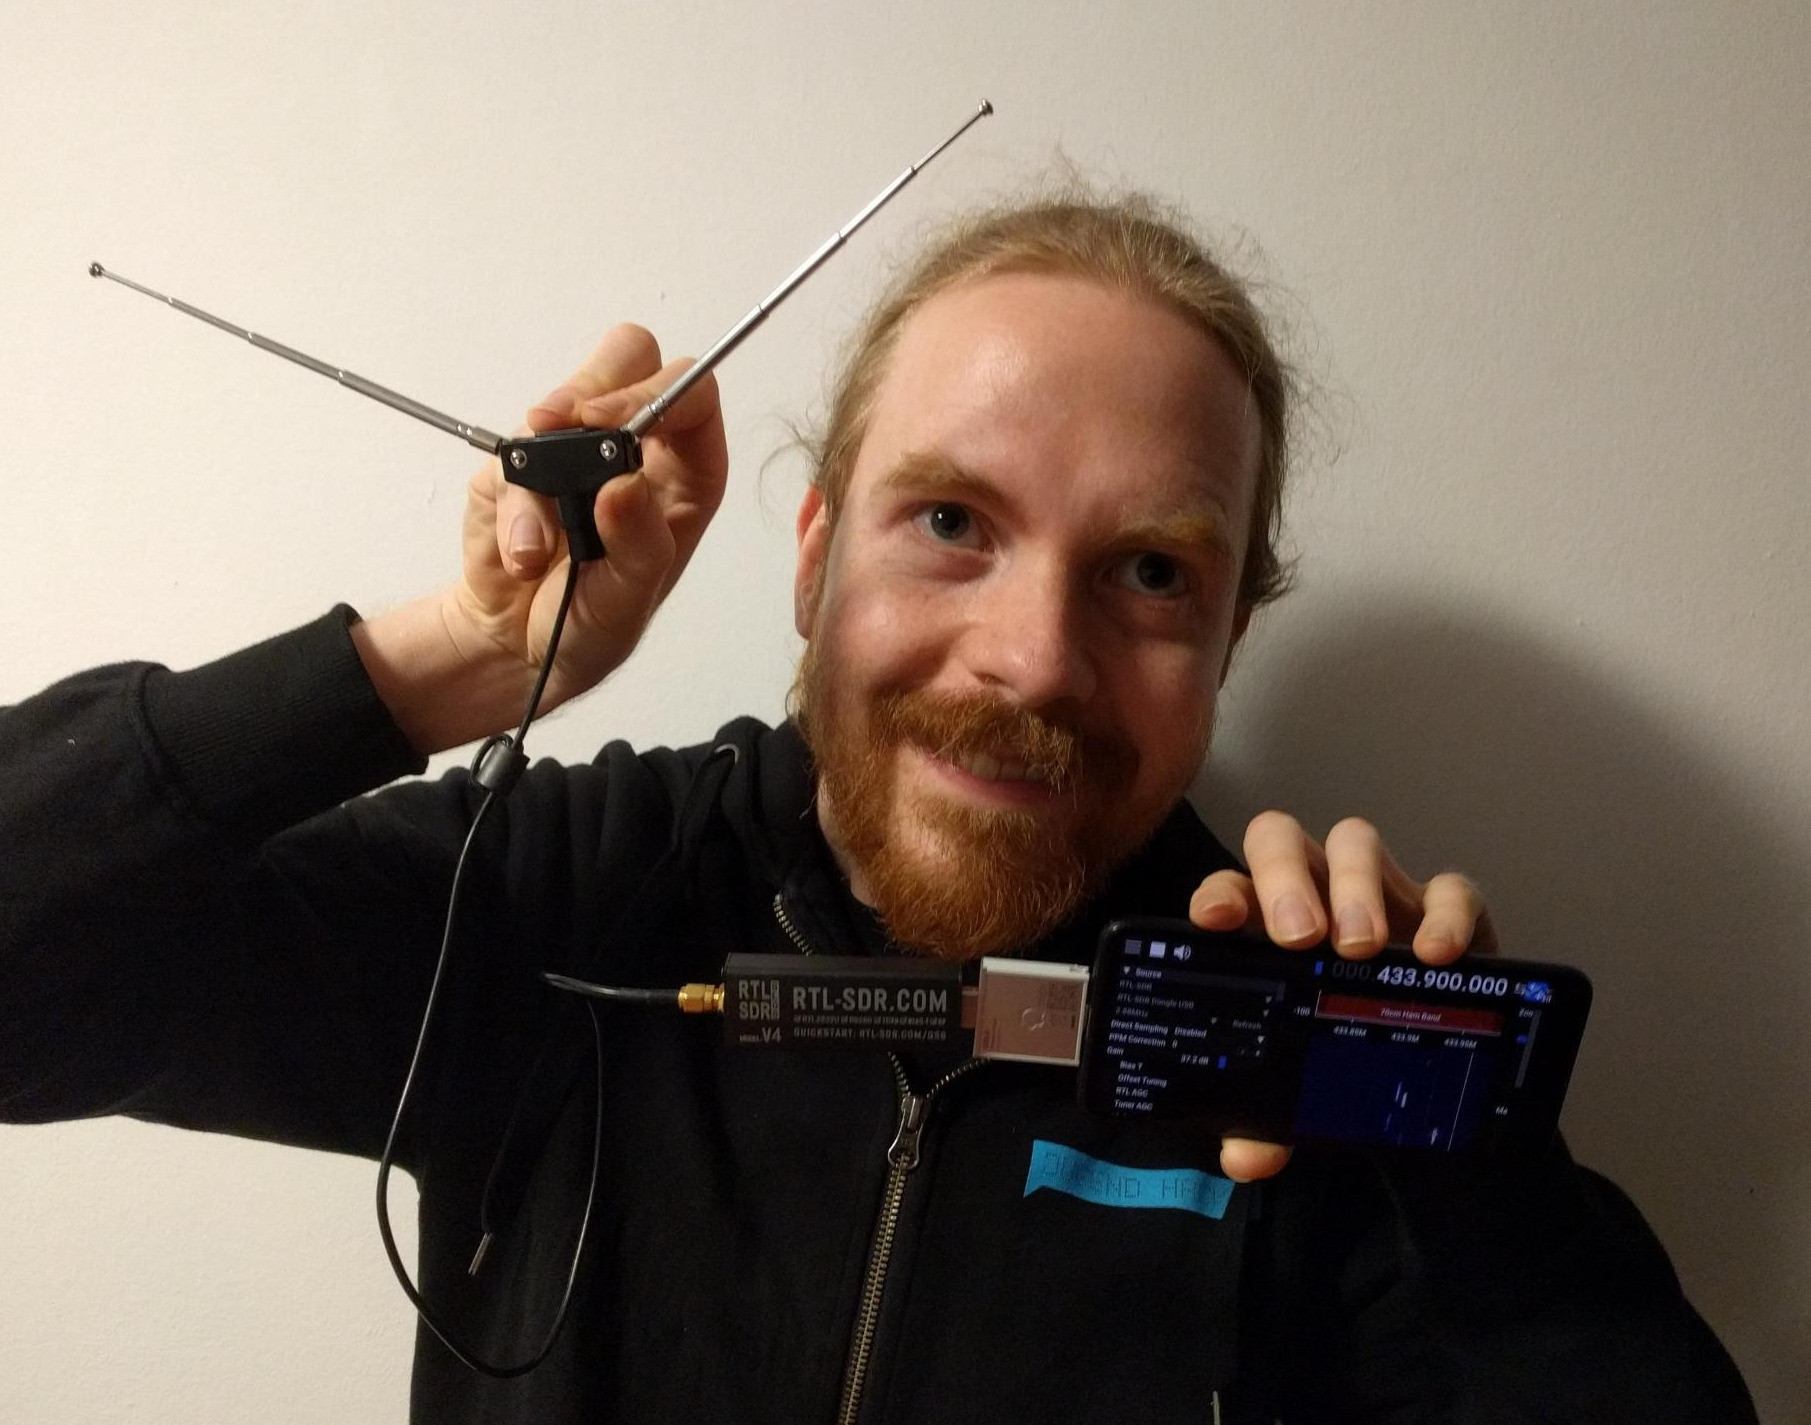 Me, a red-haired, red-bearded white human, hold a smartphone, connected to a Framework module, connected to my SDR stick, connected to an antenna! I look happy and tired.